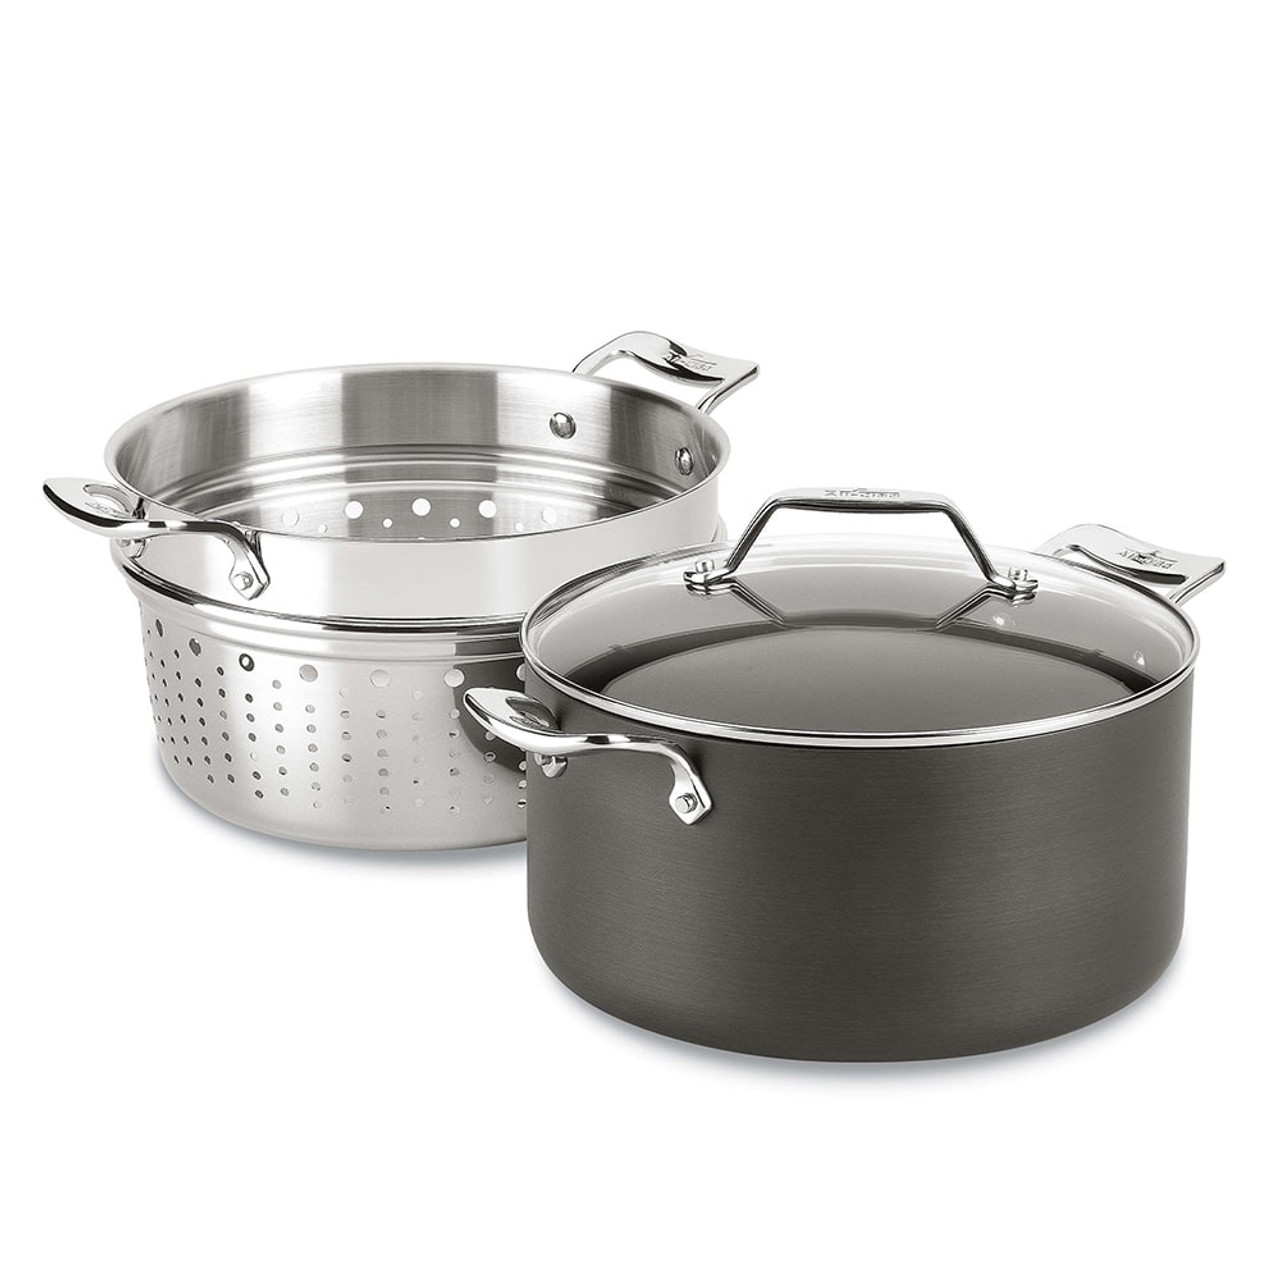 All Clad Cookware Buyer's Guide